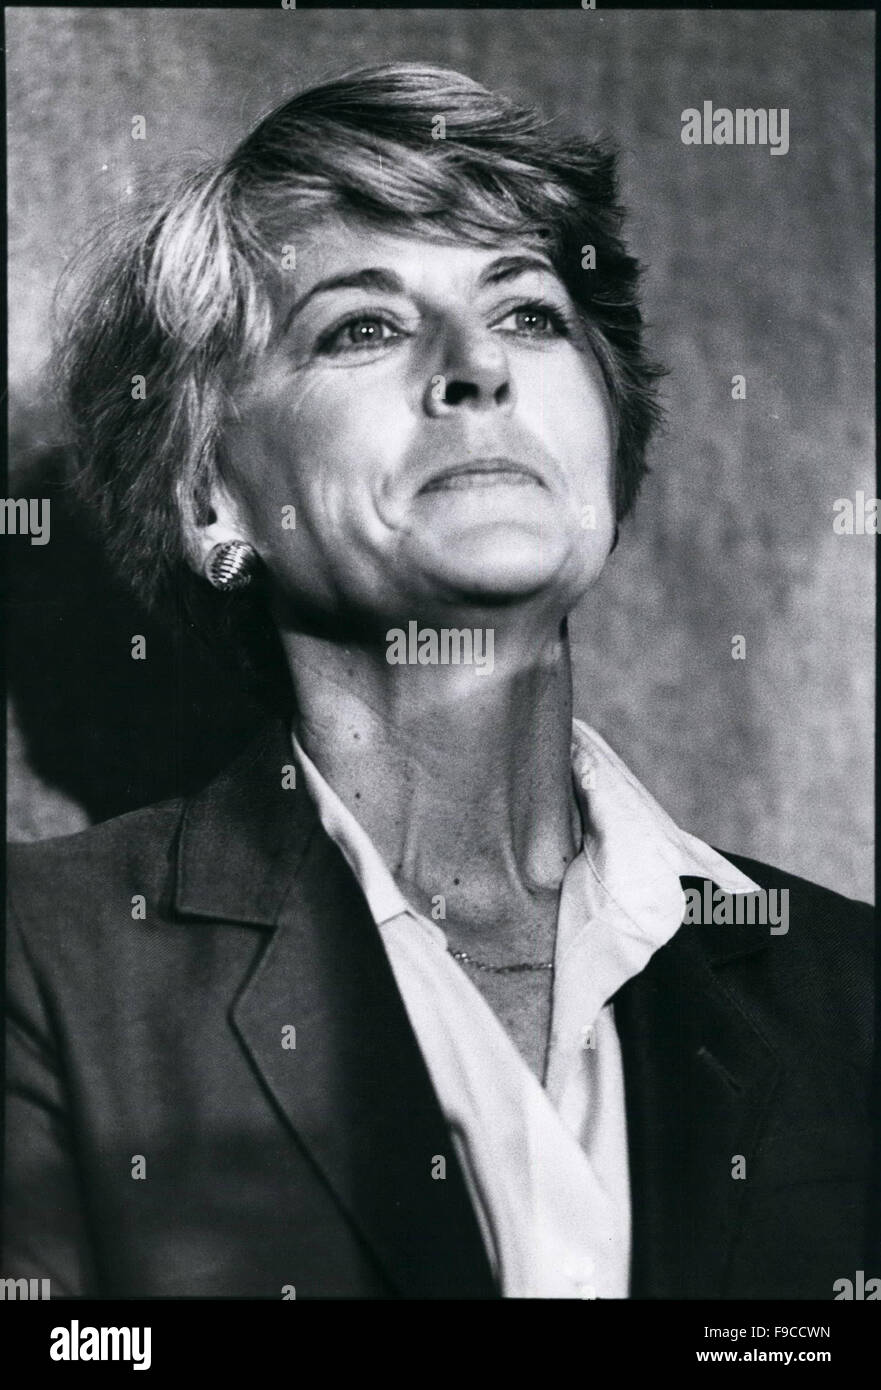 GERALDINE FERRARO (Aug. 26, 1935 - Mar. 26, 2011) was an American attorney, a Democratic Party politician, and a member of the United States House of Representatives. She was the first female vice presidential candidate representing a major American political party. PICTURED: GERALDINE FERRARO in the 1980's, location unknown. © Keystone Pictures USA/ZUMAPRESS.com/Alamy Live News Stock Photo